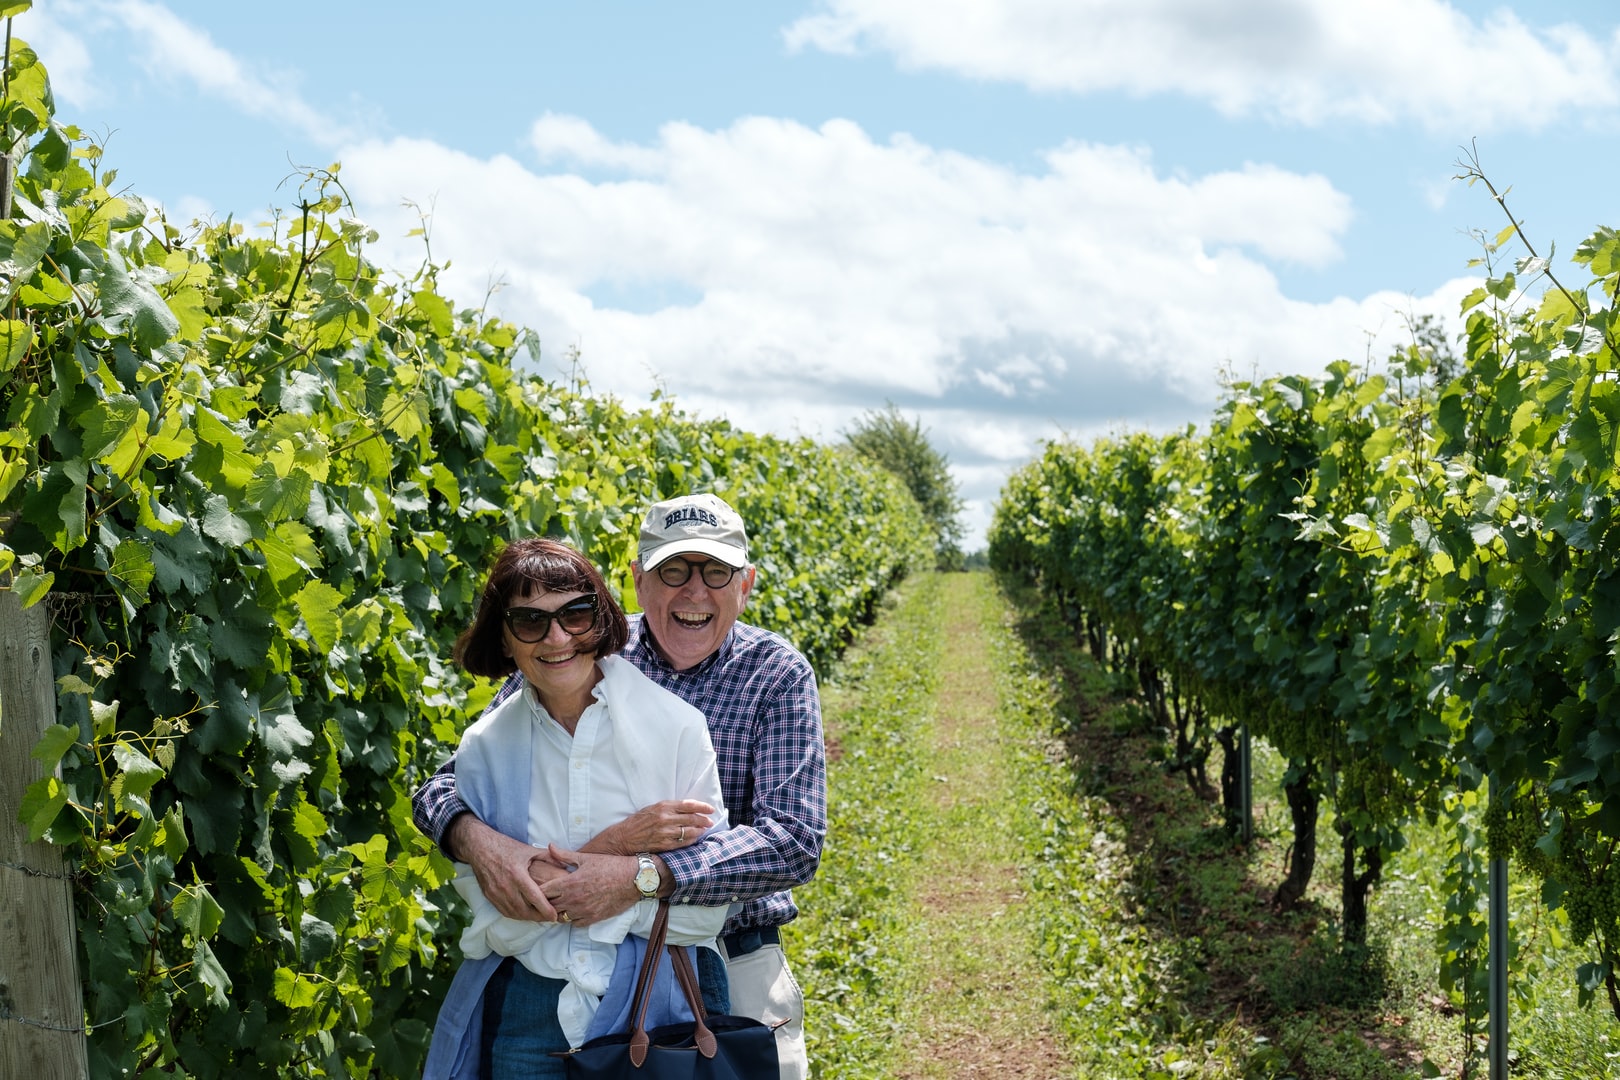 Older Couple Smiling in a Winery